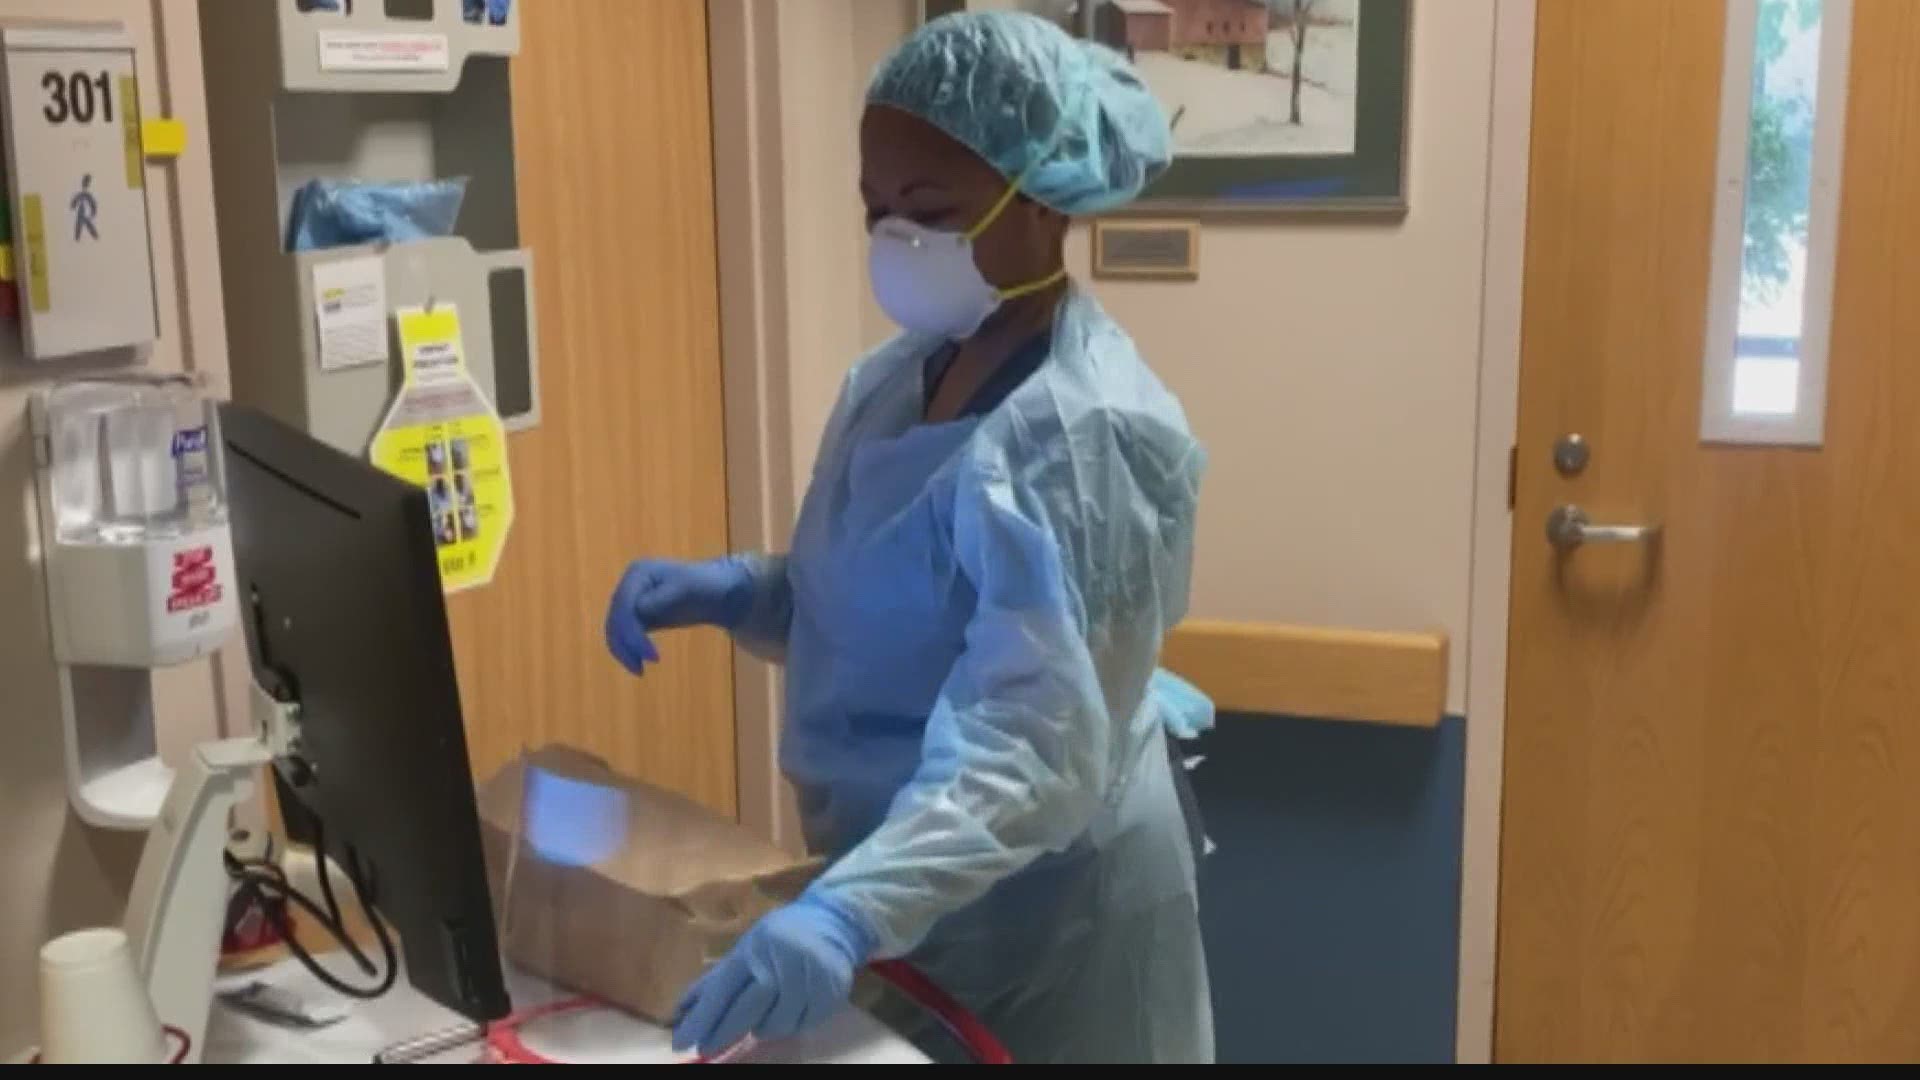 13News reporter Sarah Jones talked with a respiratory therapist who gave up her job in management to serve her community on the front lines.